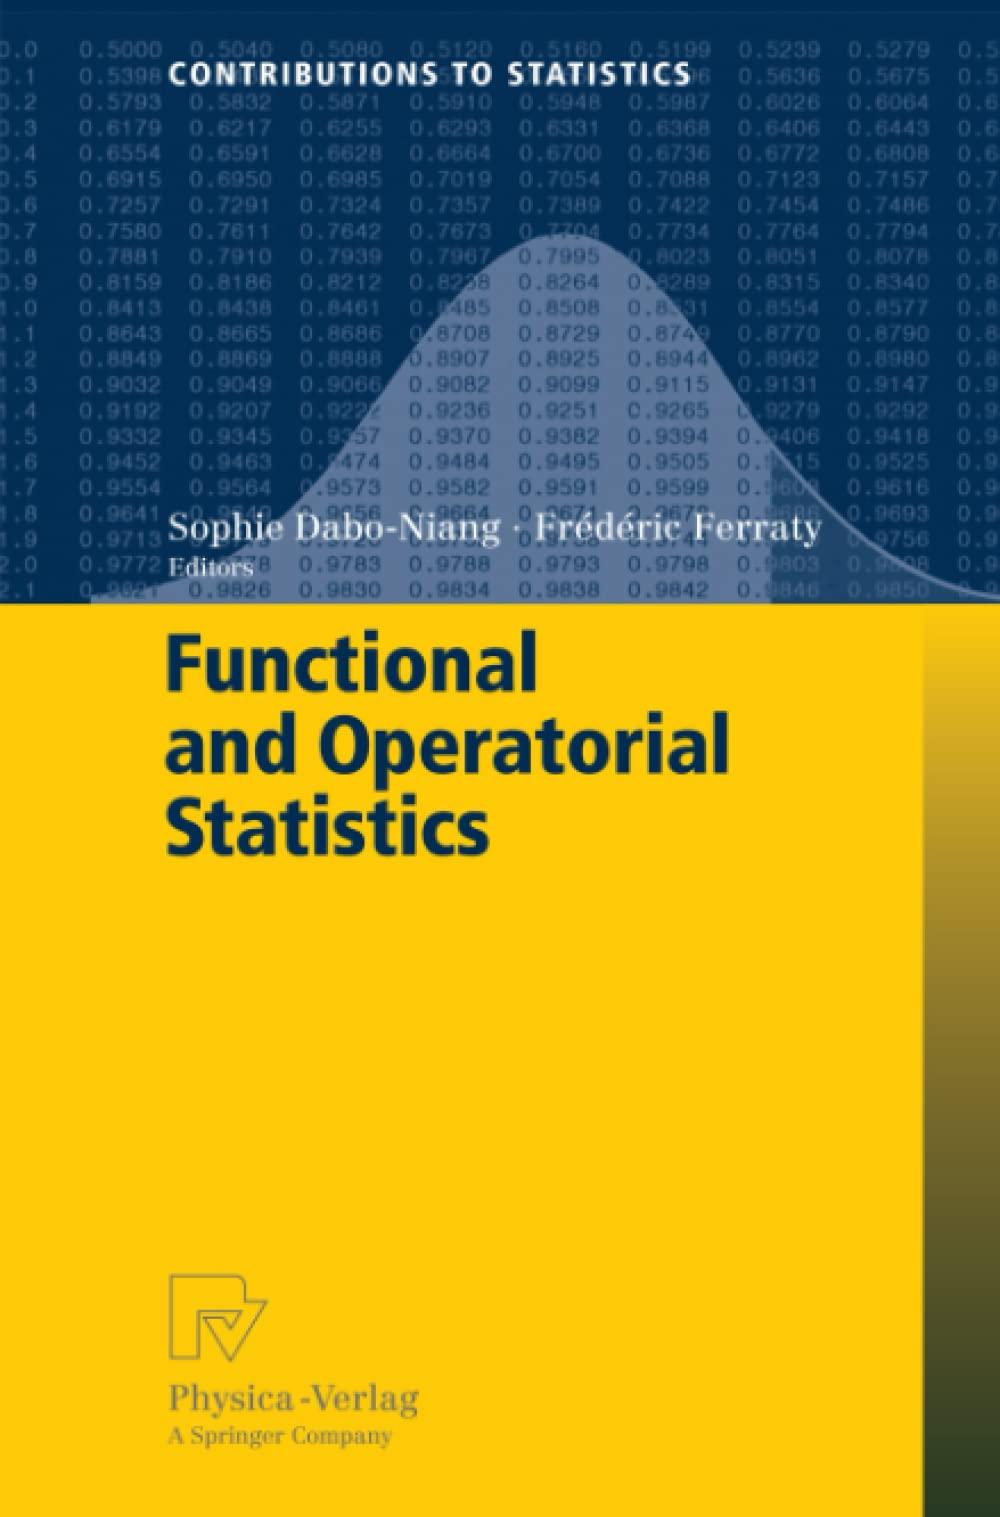 functional and operatorial statistics 1st edition sophie dabo-niang, frédéric ferraty 3790825603,